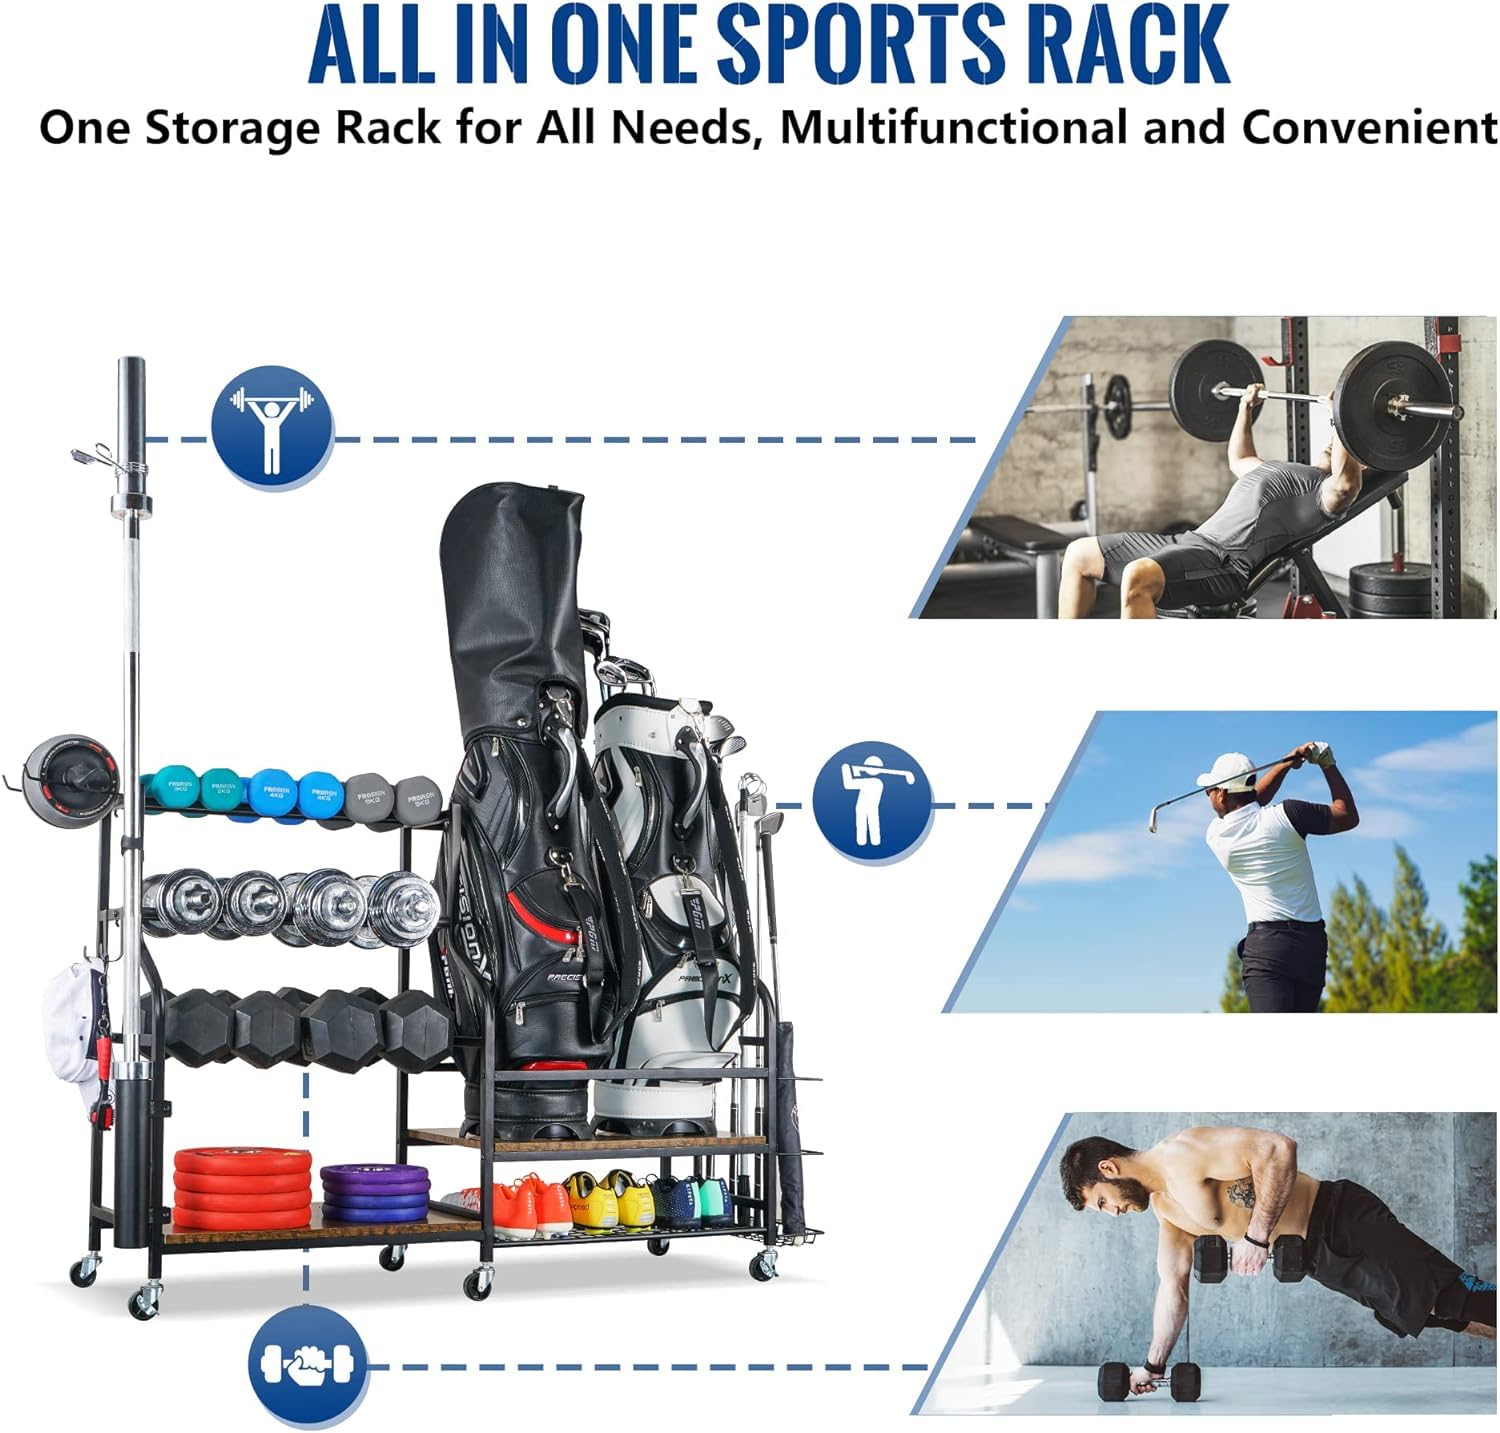 Mythinglogic Weight Rack for Dumbbells, Yoga Mat, Kettlebells and Strength Training Equipmen with Wheels and Hanging Hooks